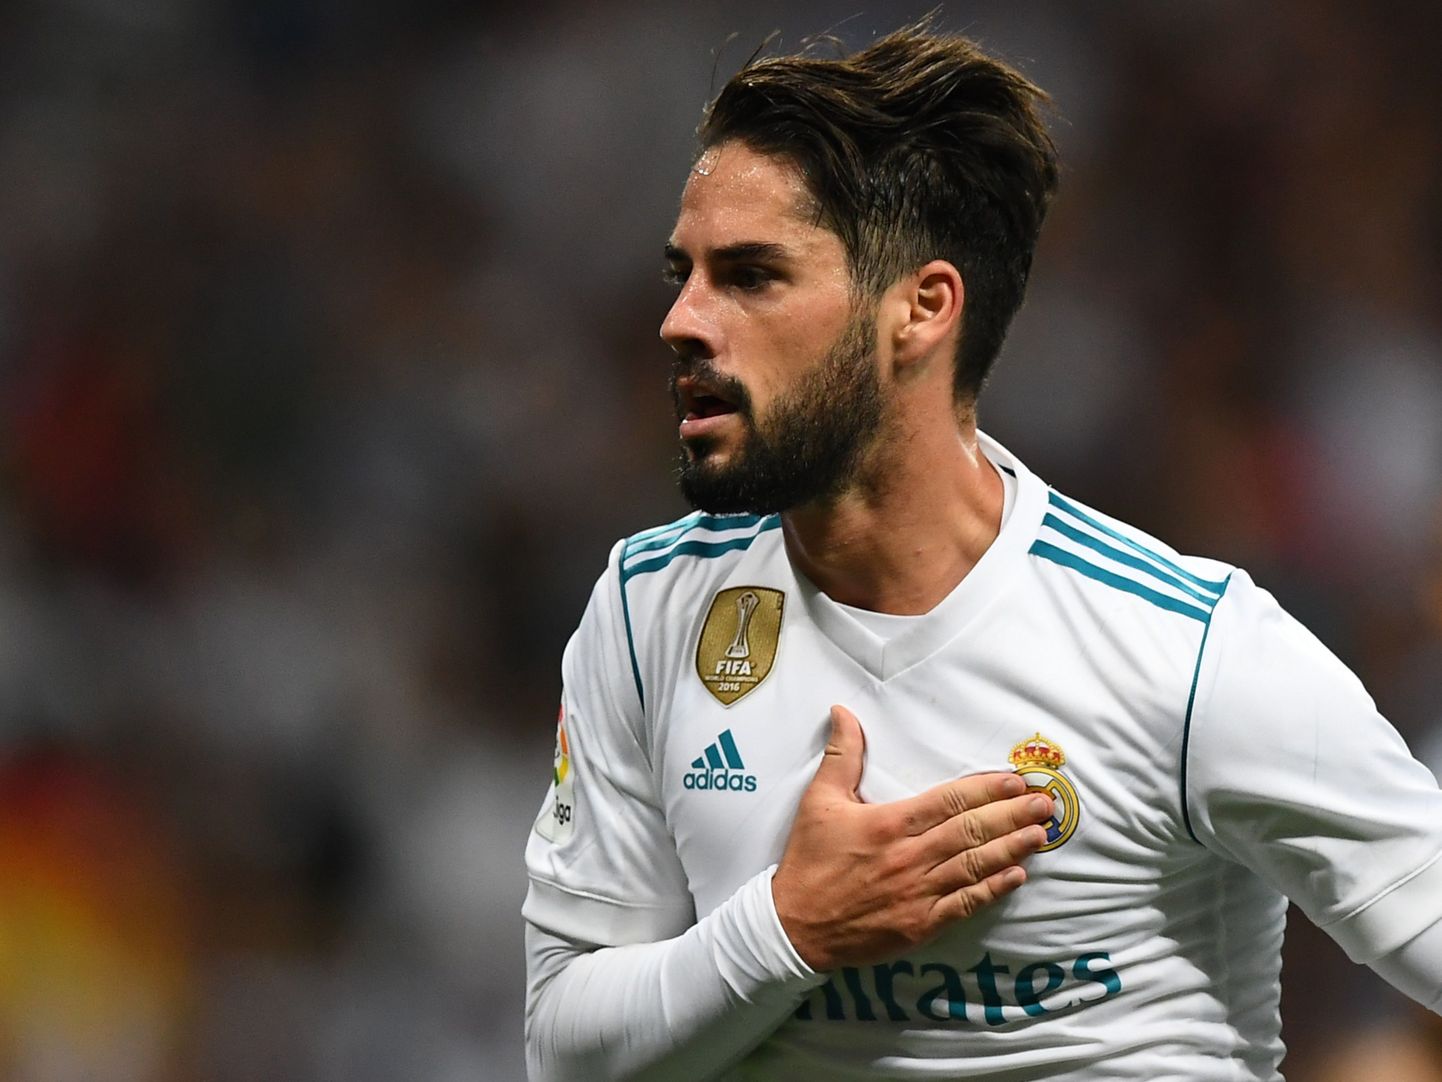 Real Madrid's midfielder Isco celebrates his second goal during the Spanish league football match Real Madrid CF vs RCD Espanyol at the Santiago Bernabeu stadium in Madrid on October 1, 2017. / AFP PHOTO / GABRIEL BOUYS